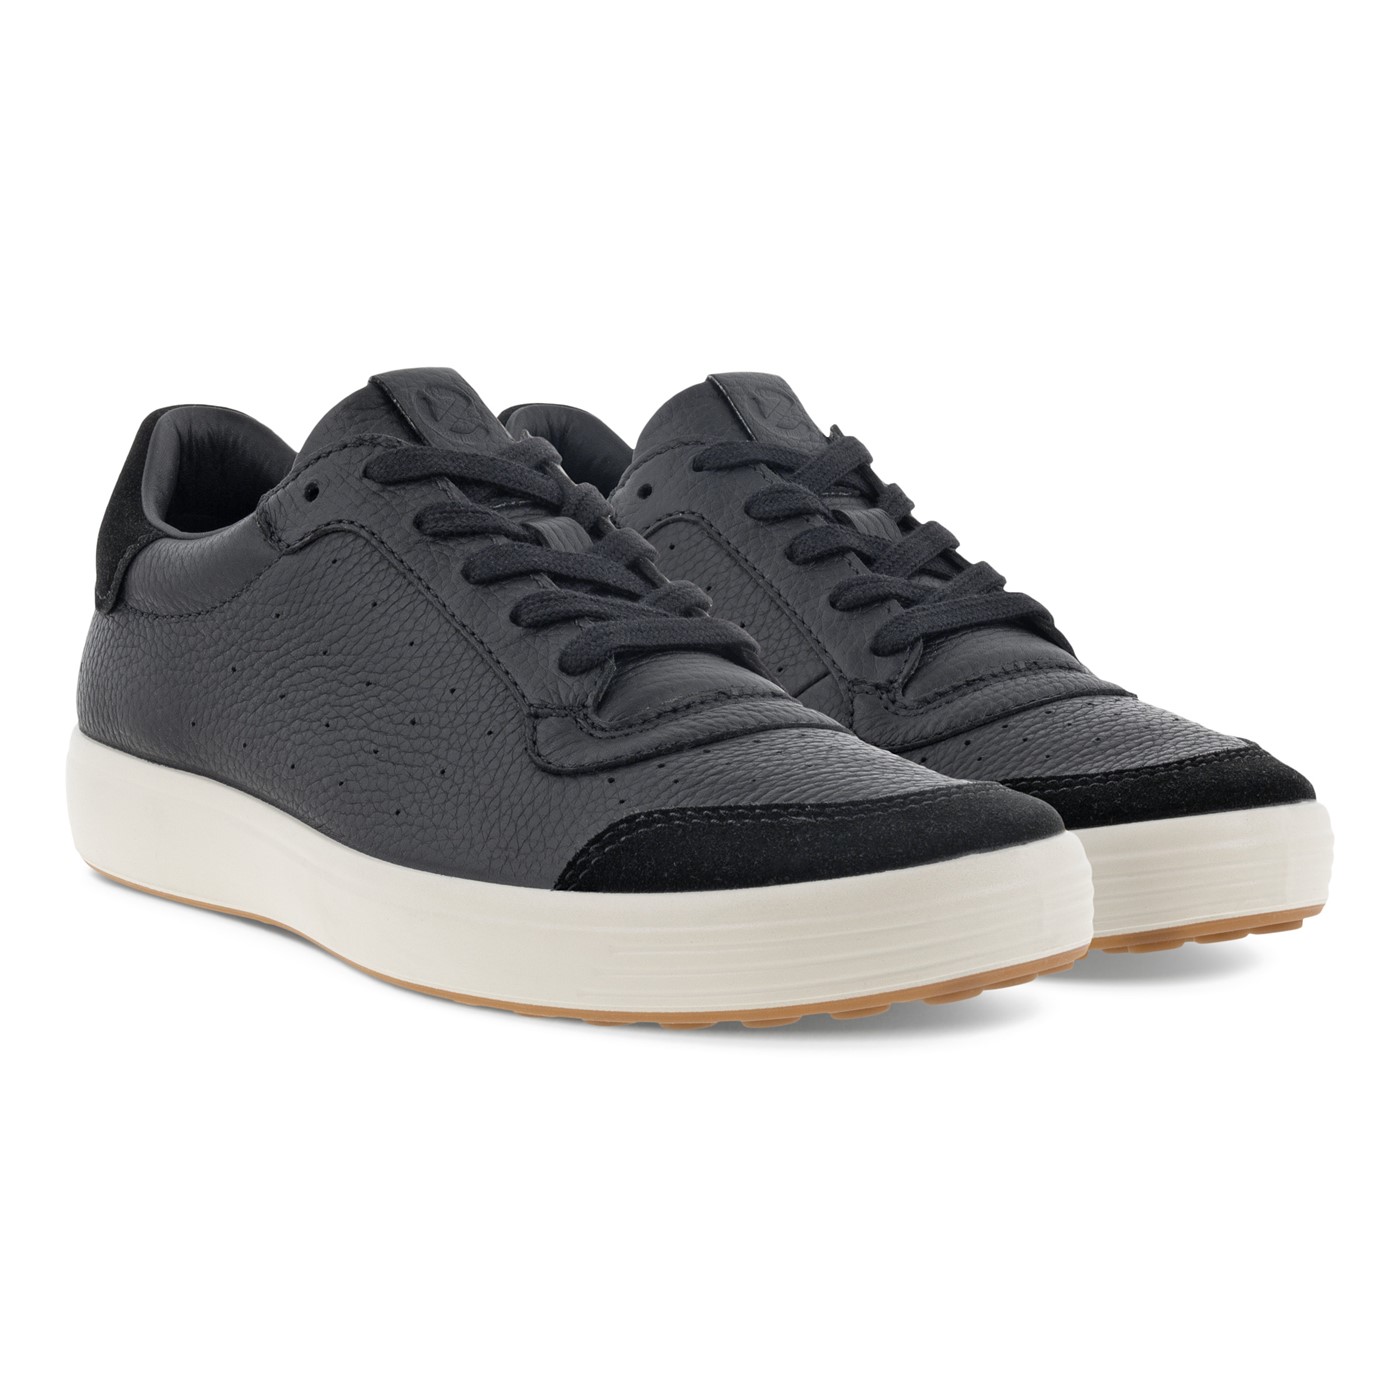 Get to know ECCO sneakers - de Burgh's Shoes for Men